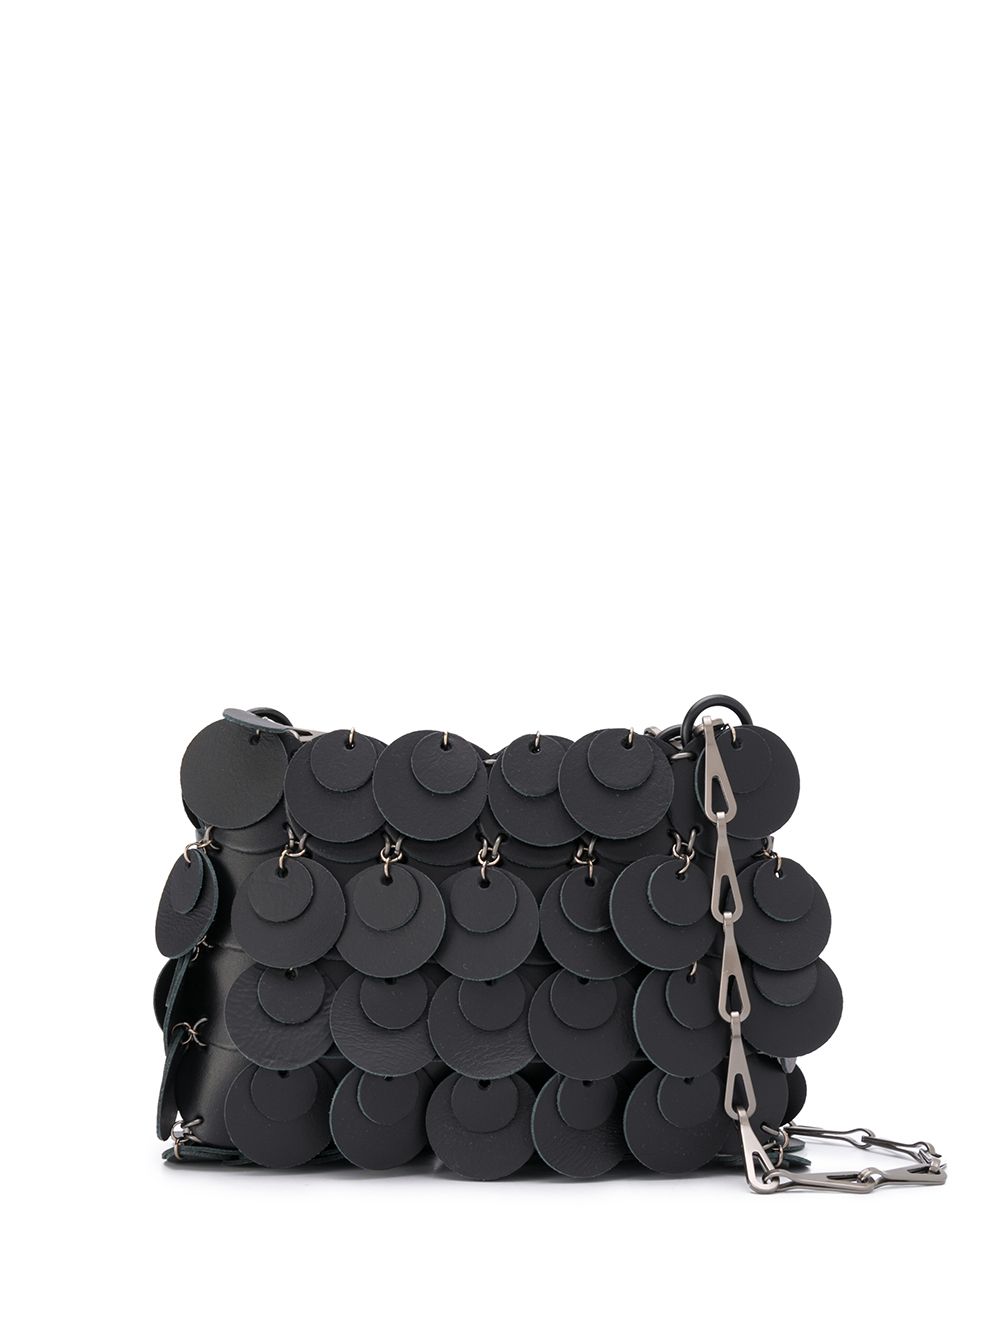 Shop Paco Rabanne leather sequinned bag with Express Delivery - FARFETCH